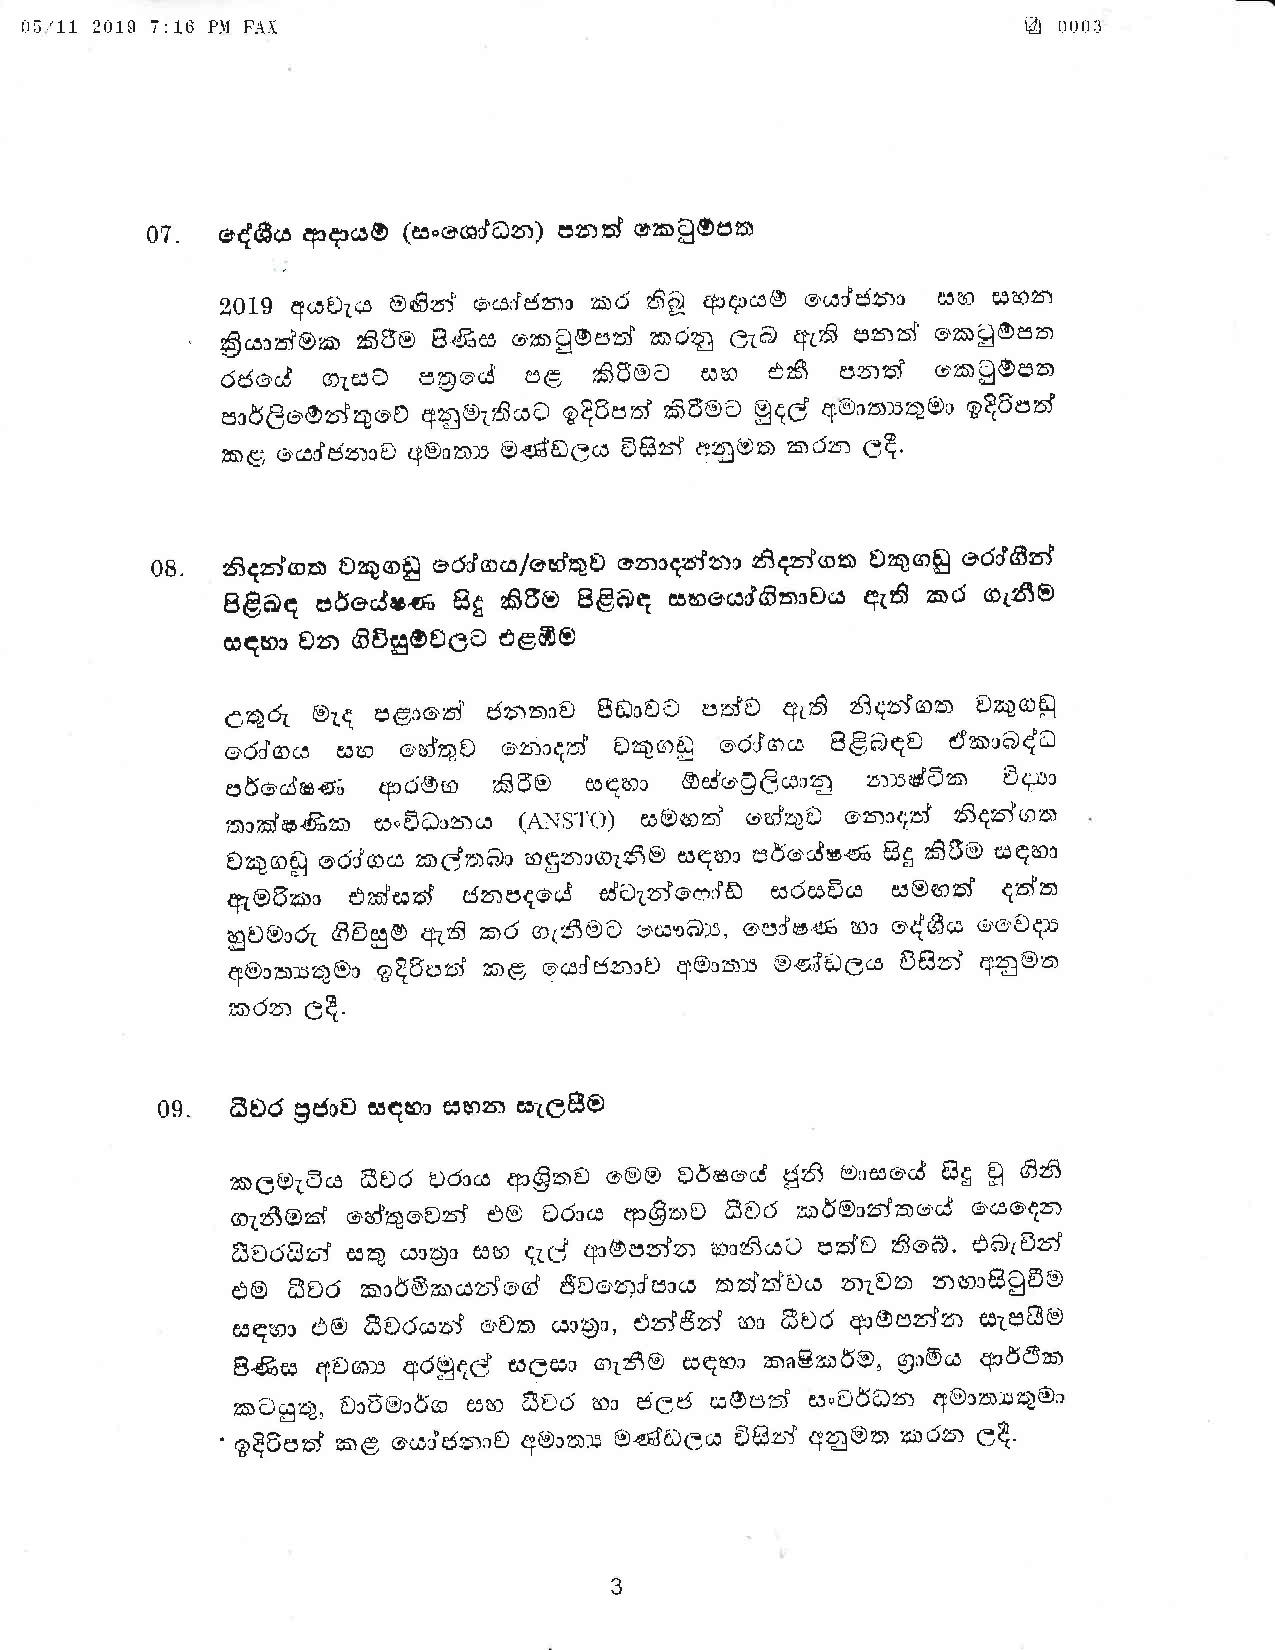 Cabinet Decision on 05.11.2019 page 003